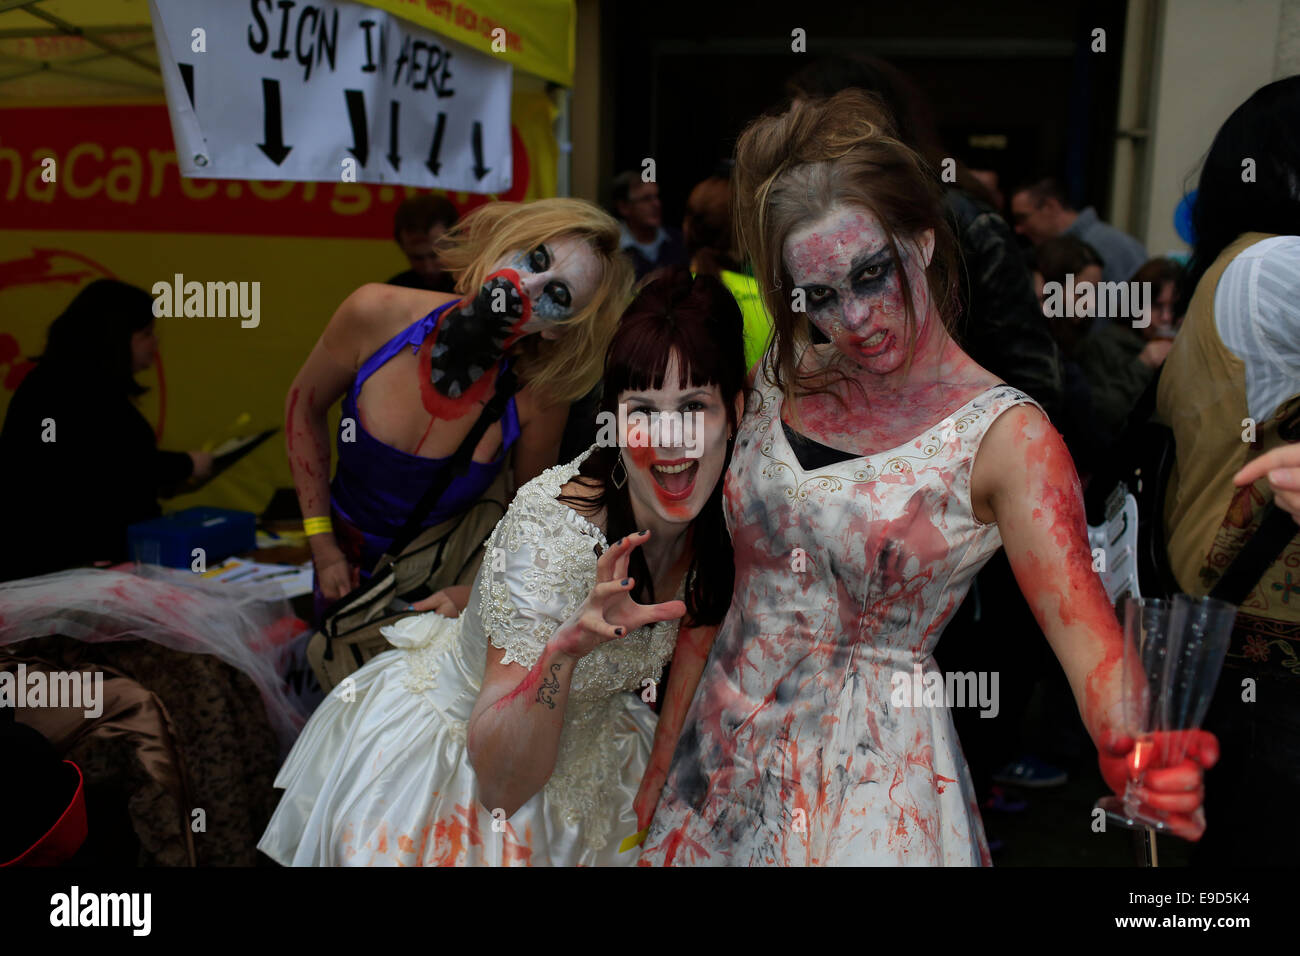 Glastonbury, Somerset, UK. 25 October 2014: Zombie hoards gather at Glastonbury for  annual Zombie walk where participants  dressed as marauding zombies lurch along the high street turning willing victims into the "undead"  This is the third annual Glastonbury Zombie Walk and is hosted by local charity, Martha Care, with all proceeds going toward supporting families with very sick children. Credit:  Tom Corban/Alamy Live News Stock Photo